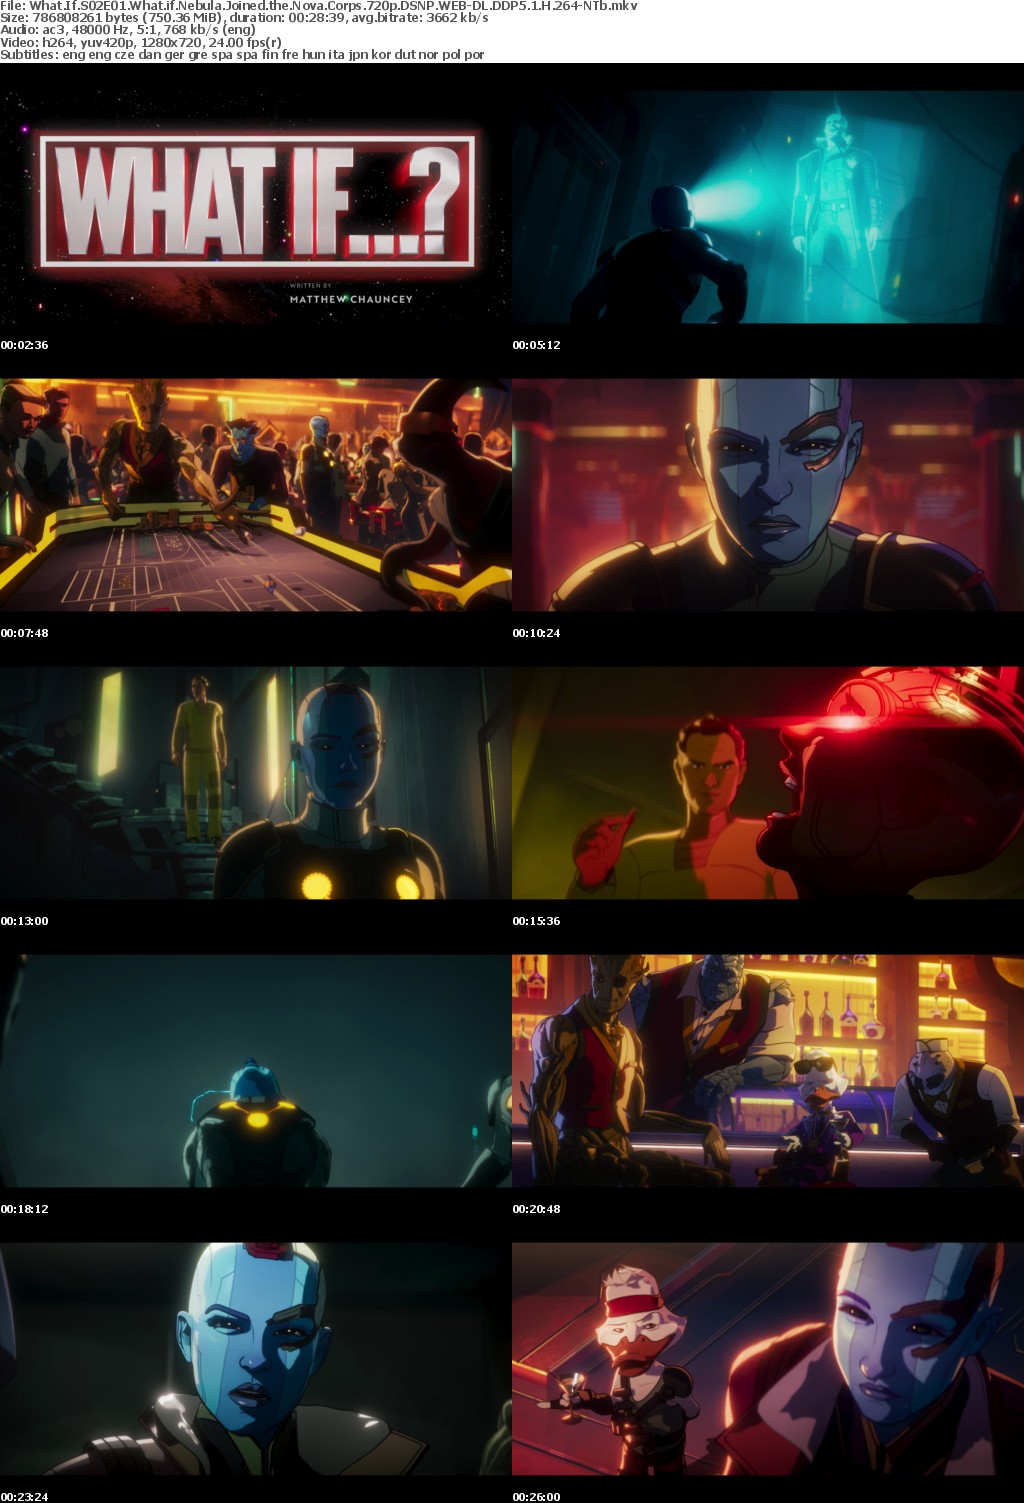 What If S02E01 What if Nebula Joined the Nova Corps 720p DSNP WEB-DL DDP5 1 H 264-NTb